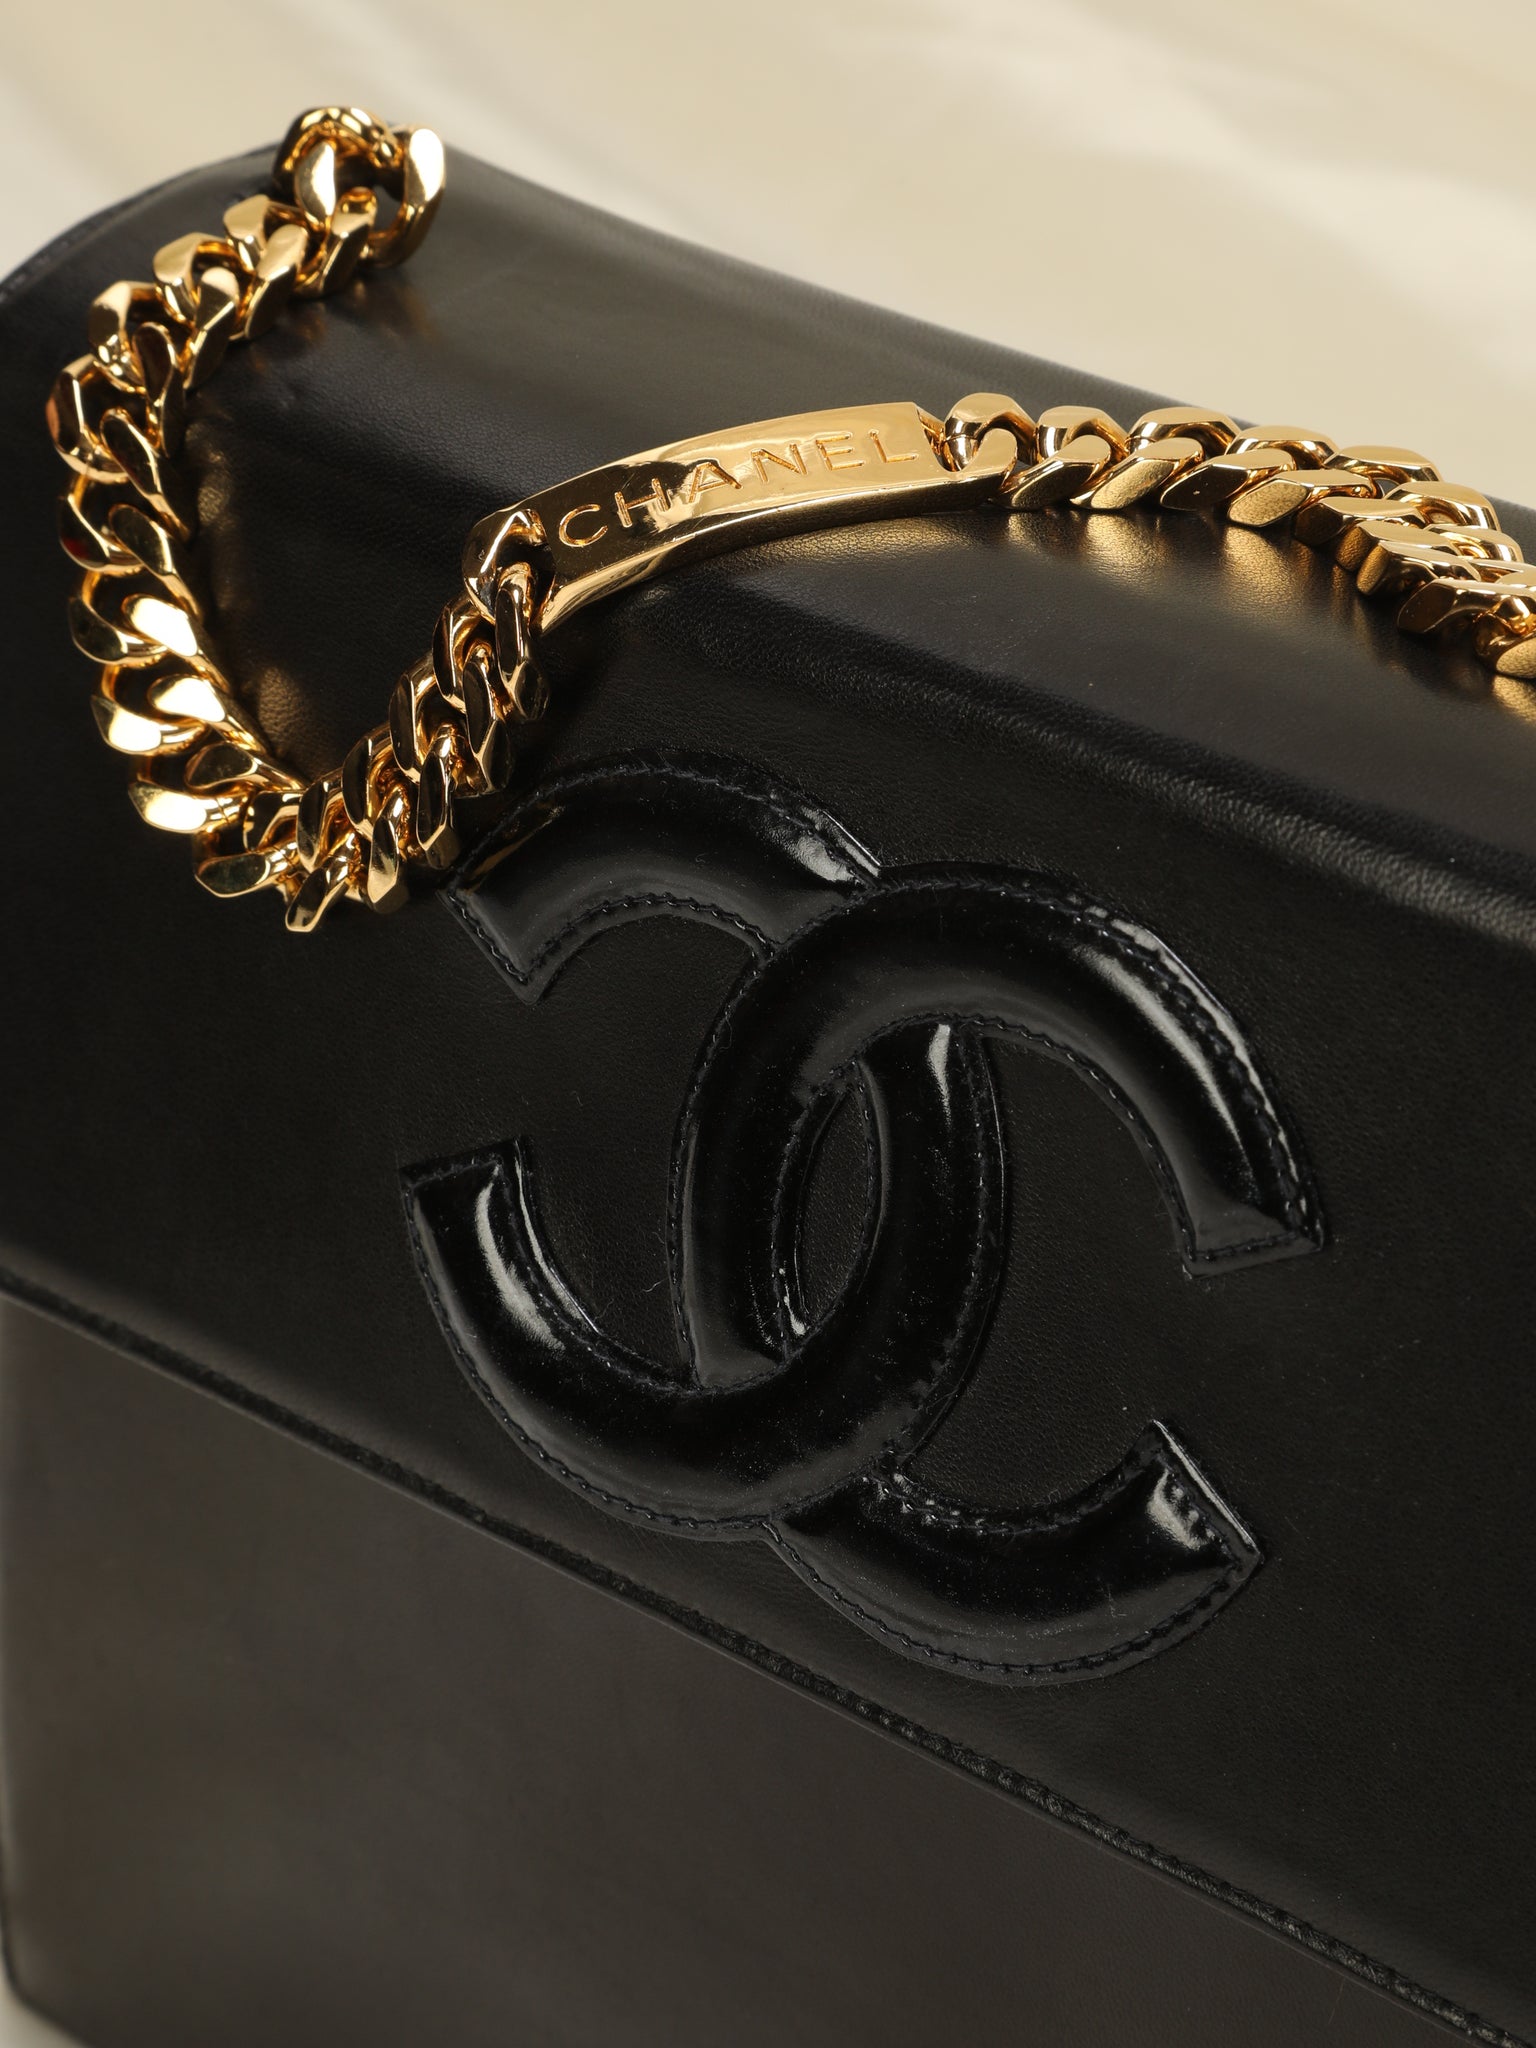 Extremely Rare Chanel Timeless Curb Chain Bag